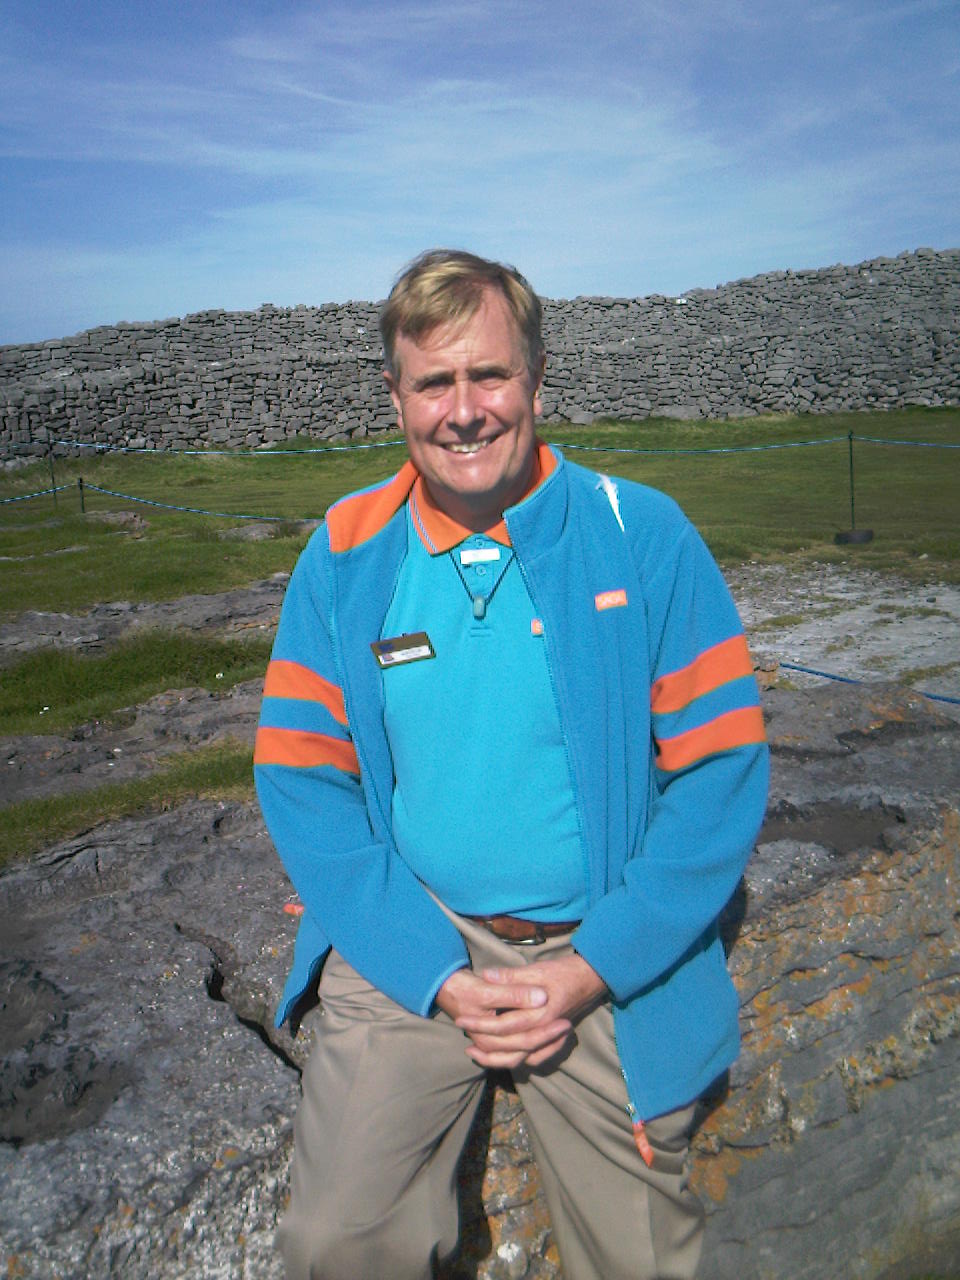 Me in the Saga Rose tour escort's uniform at the hill fort on Inis Mor